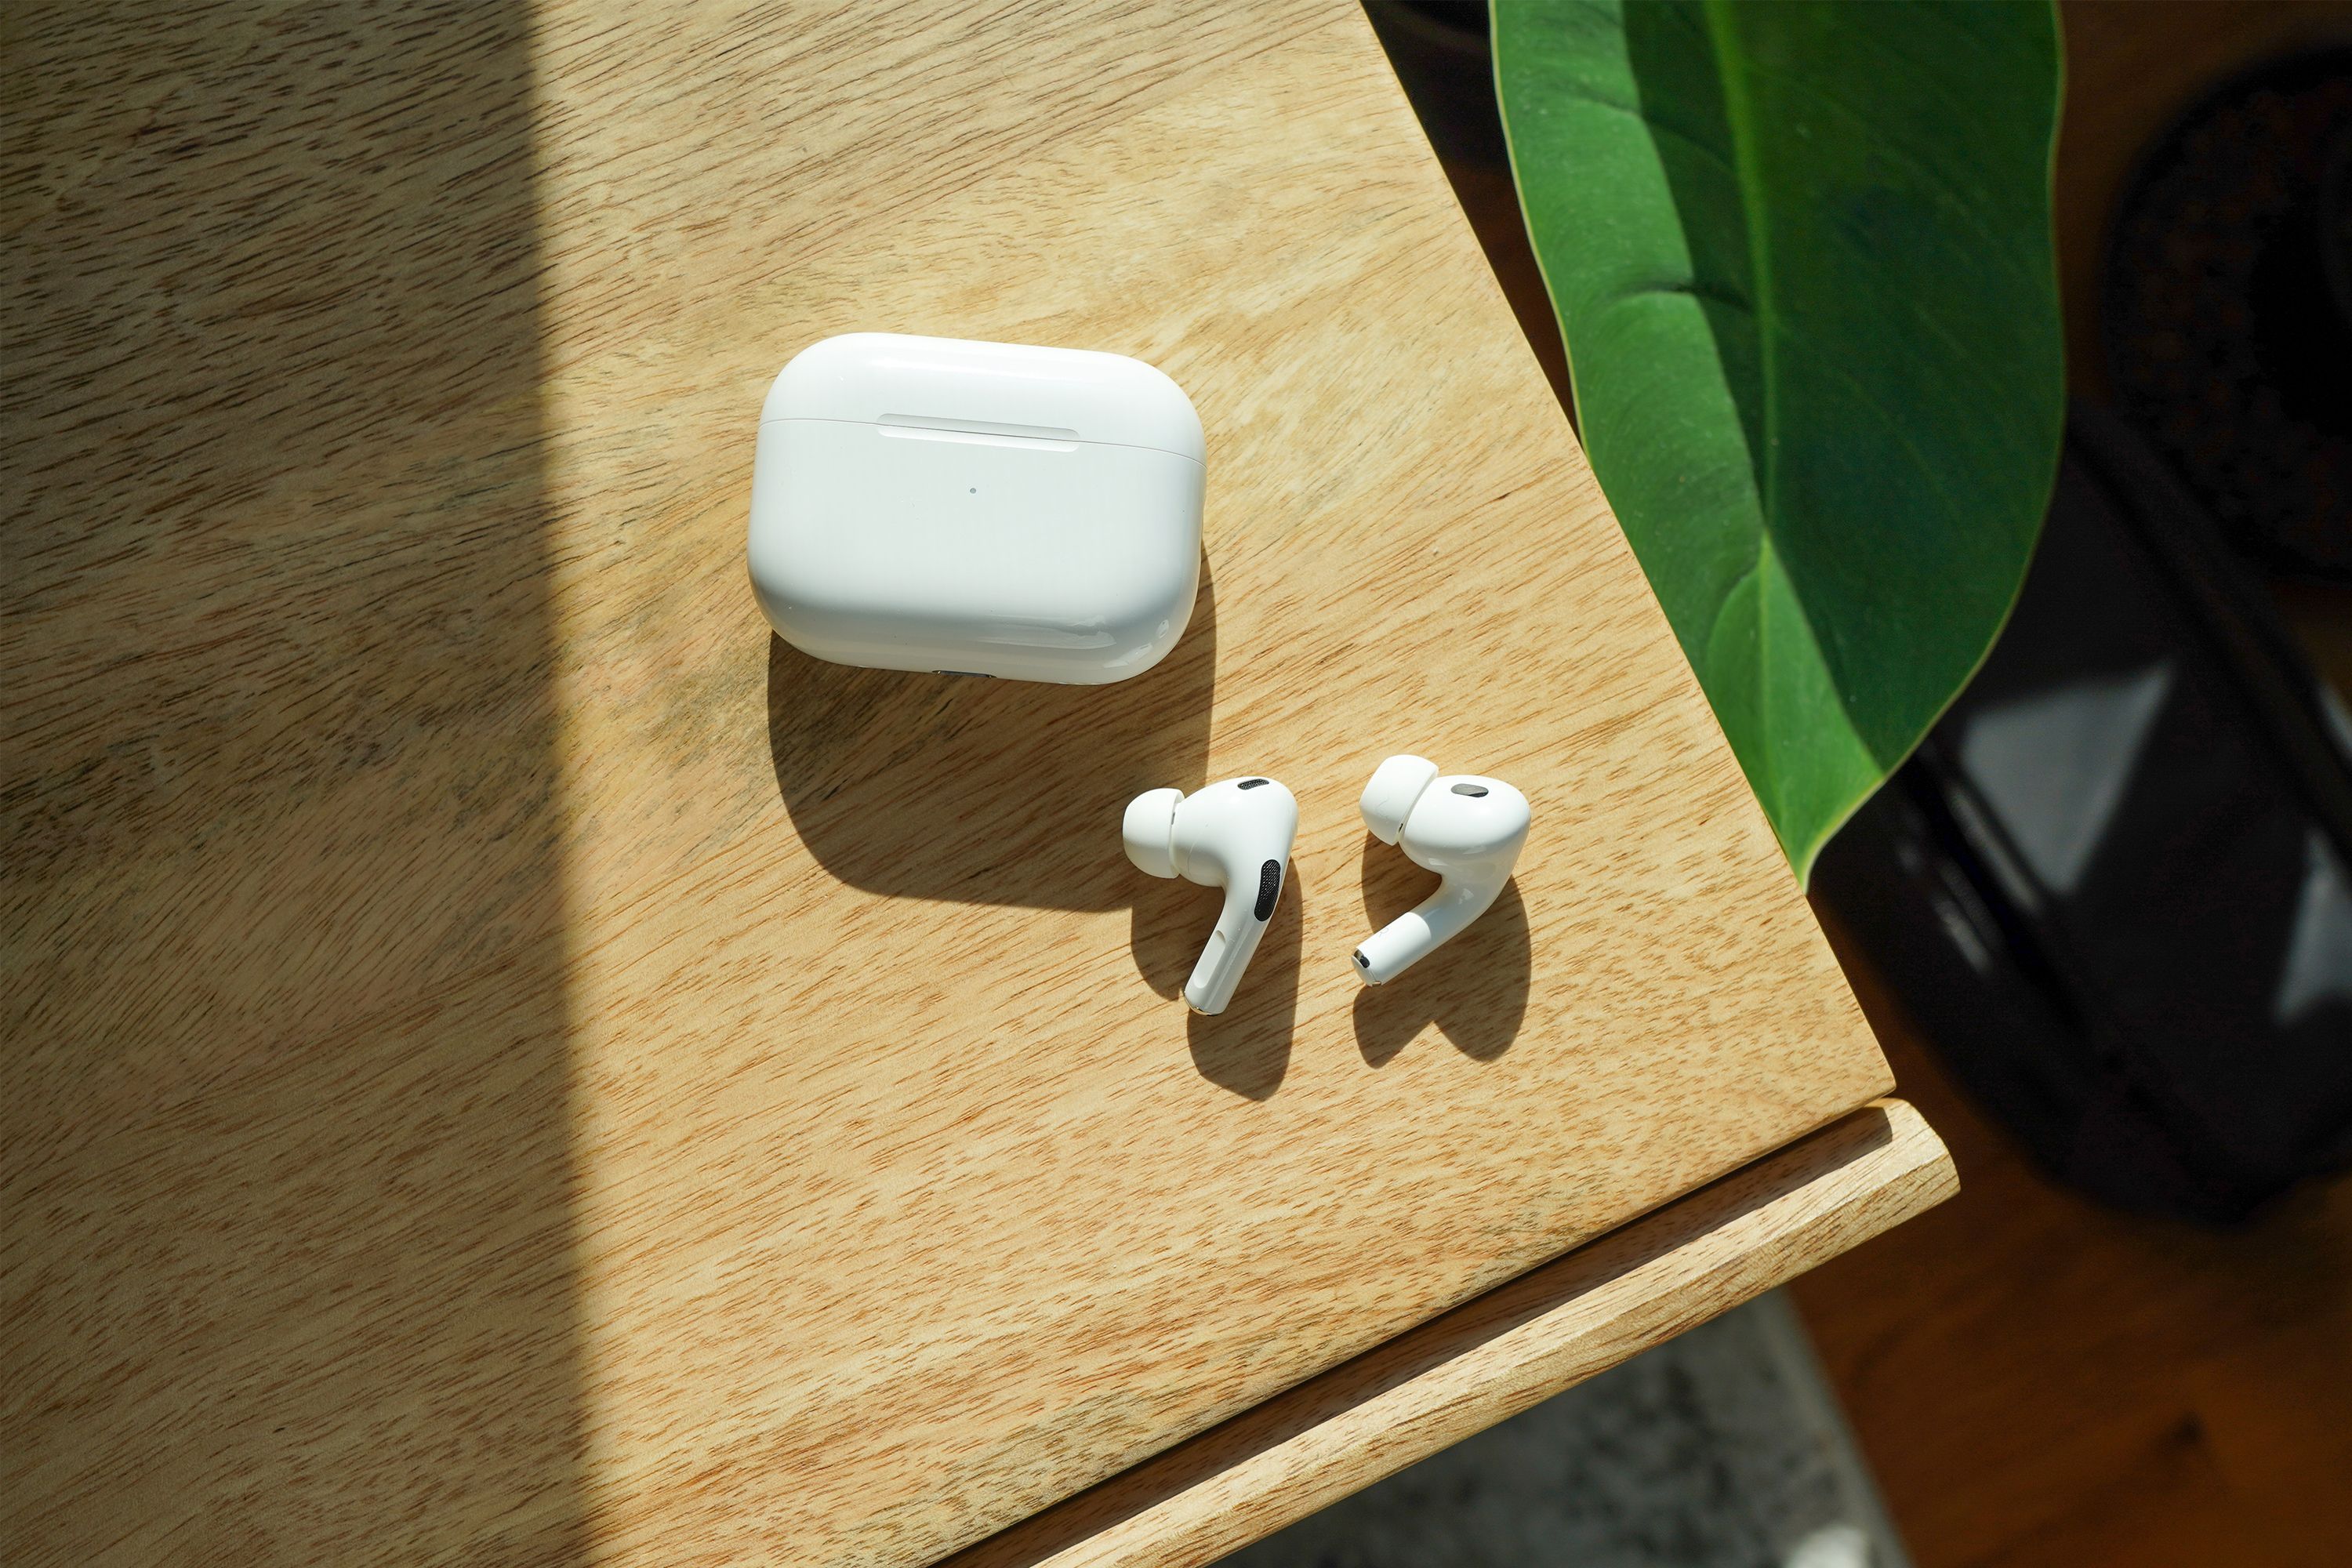 Apple AirPods Pro 2 Review: Cupertino's Best Wireless Earbuds